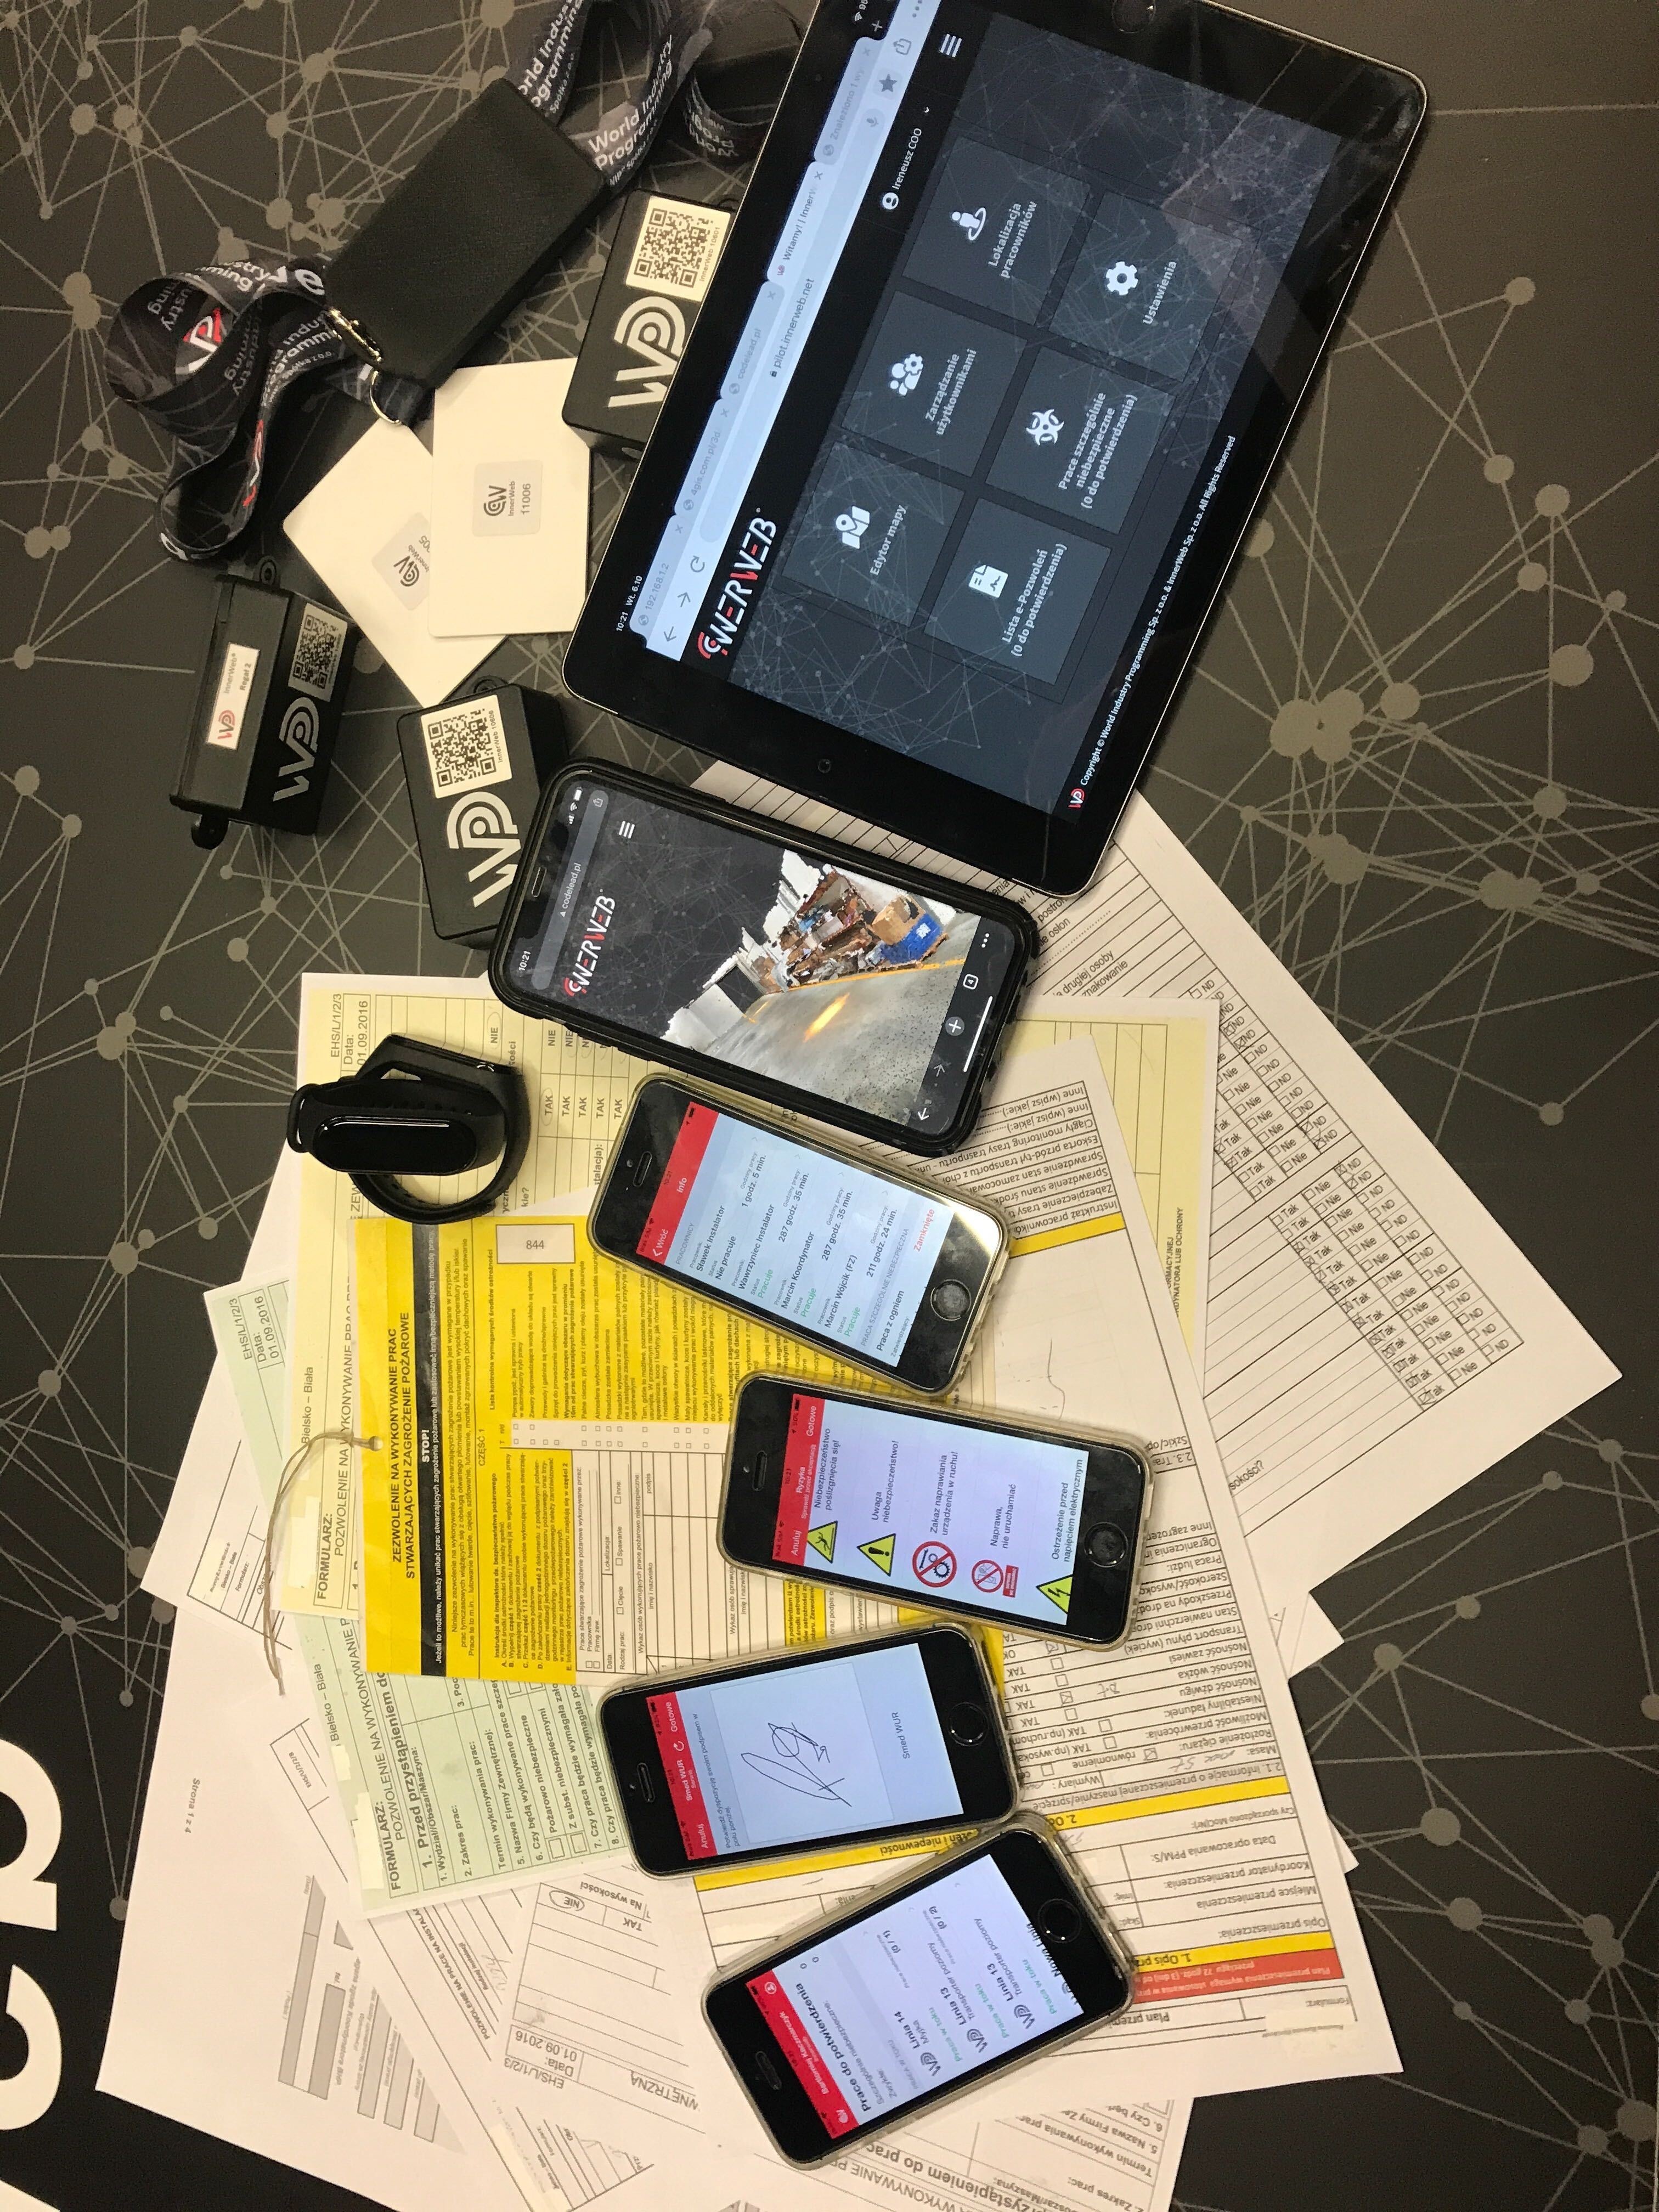 On the table with documents there are mobile devices presenting the InnerWeb application